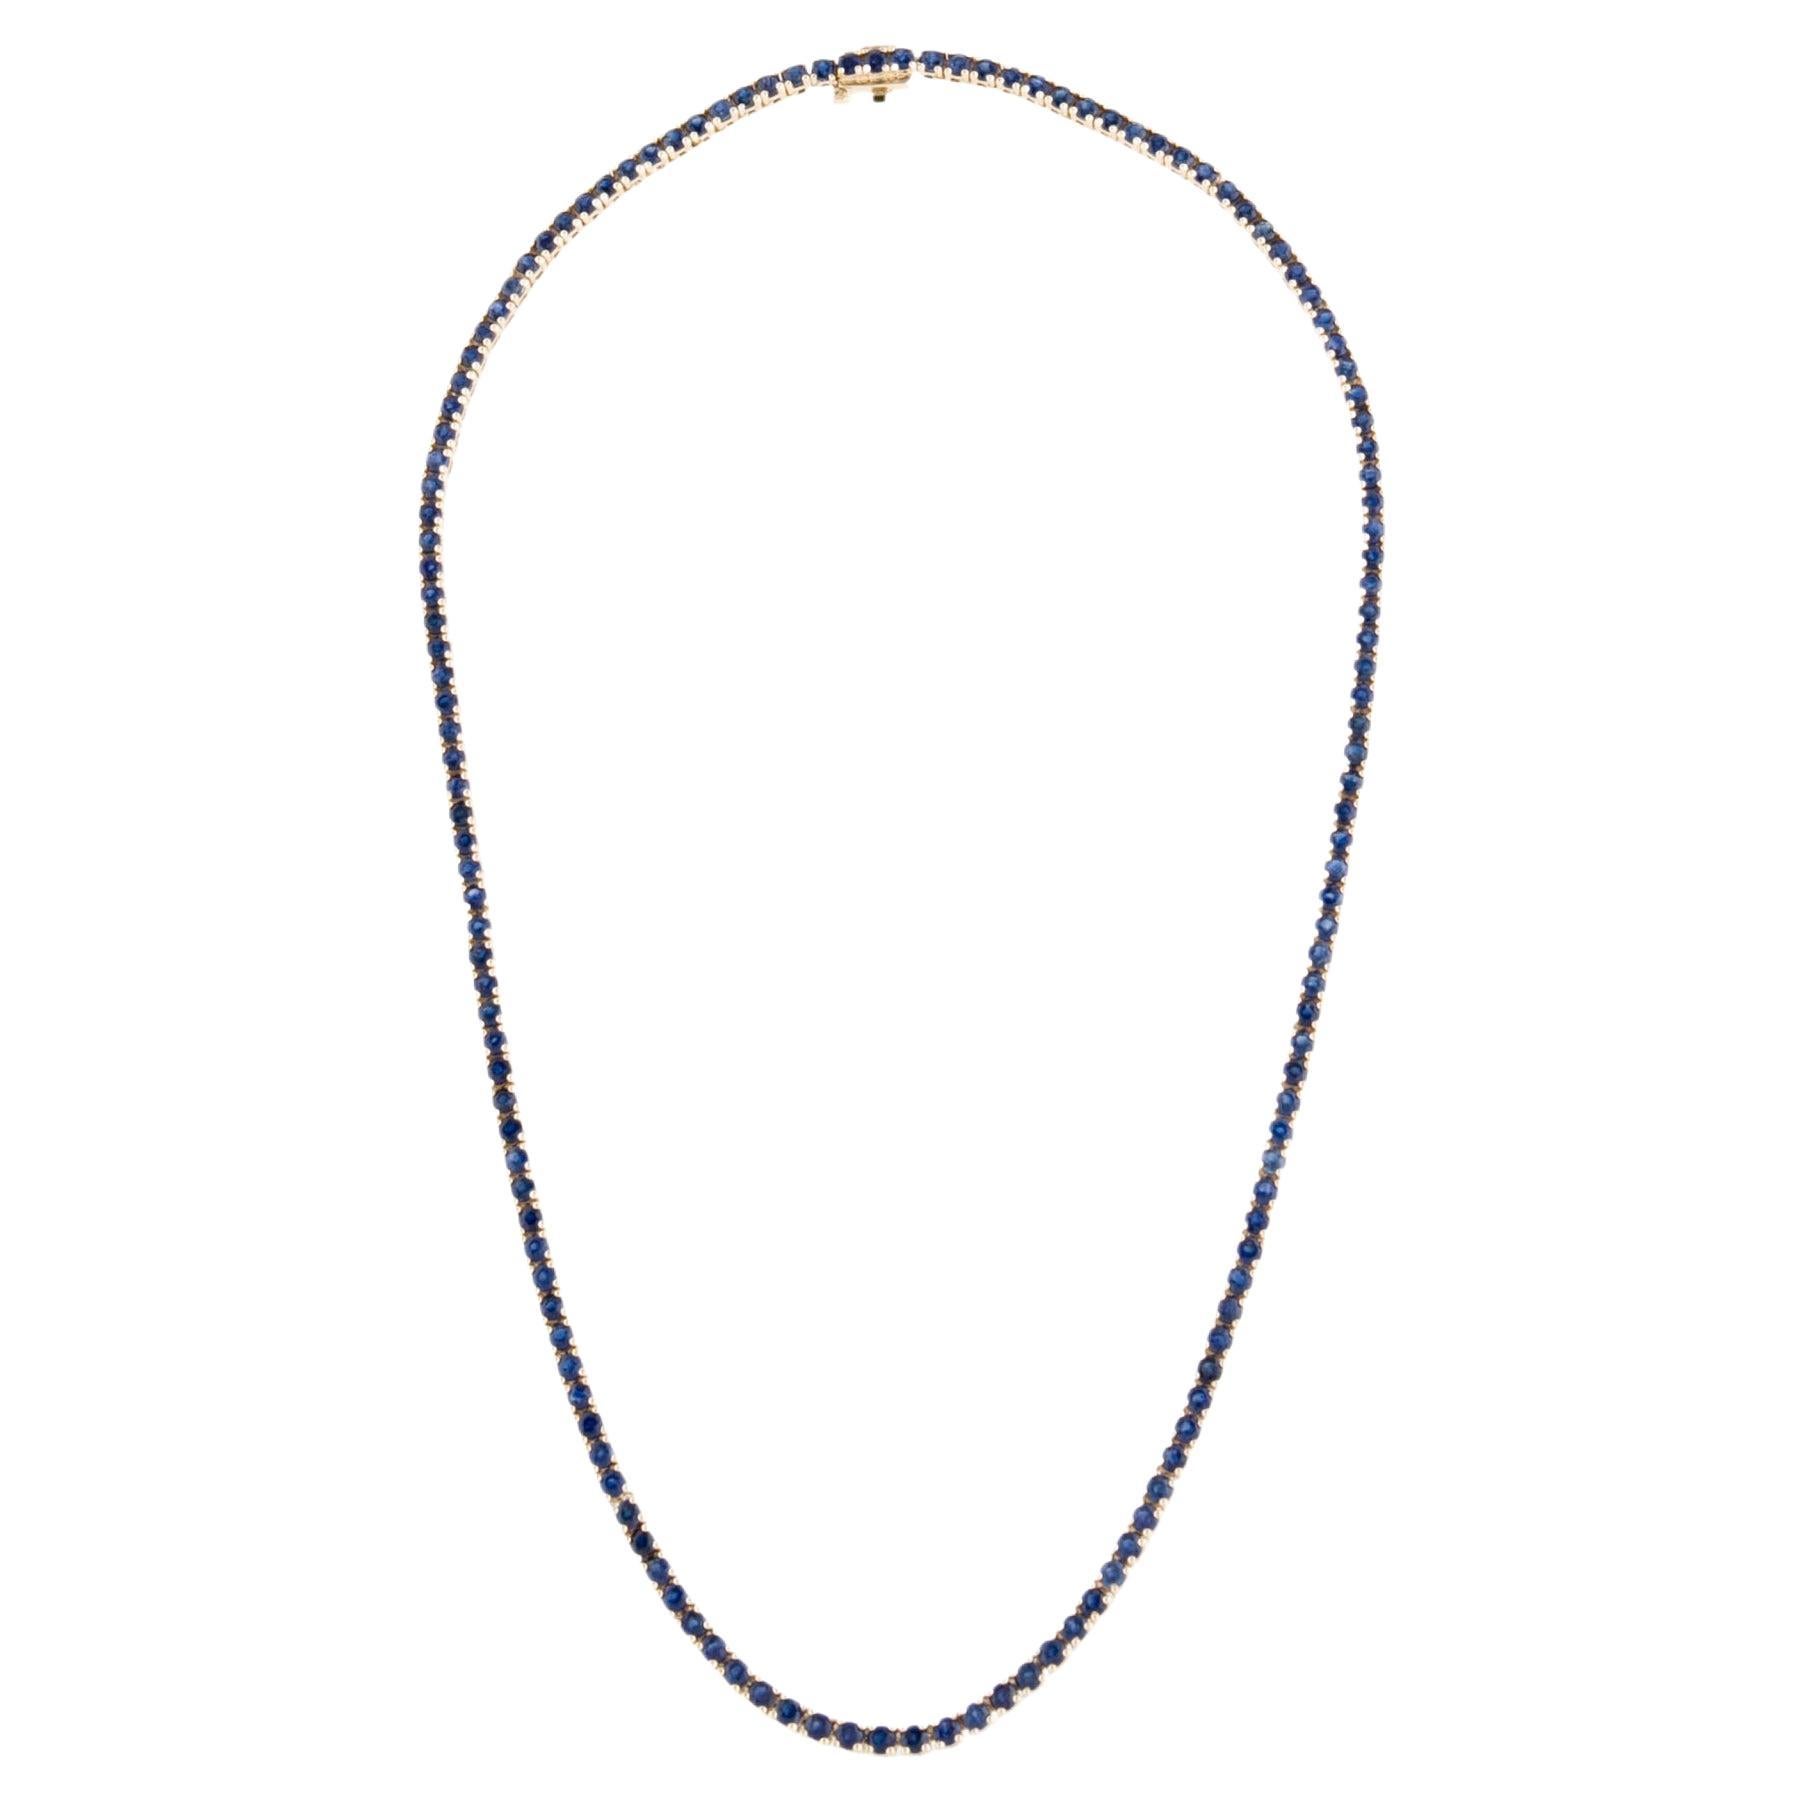 14K Sapphire Chain Necklace 15.26ctw - Exquisite & Timeless Jewelry Piece